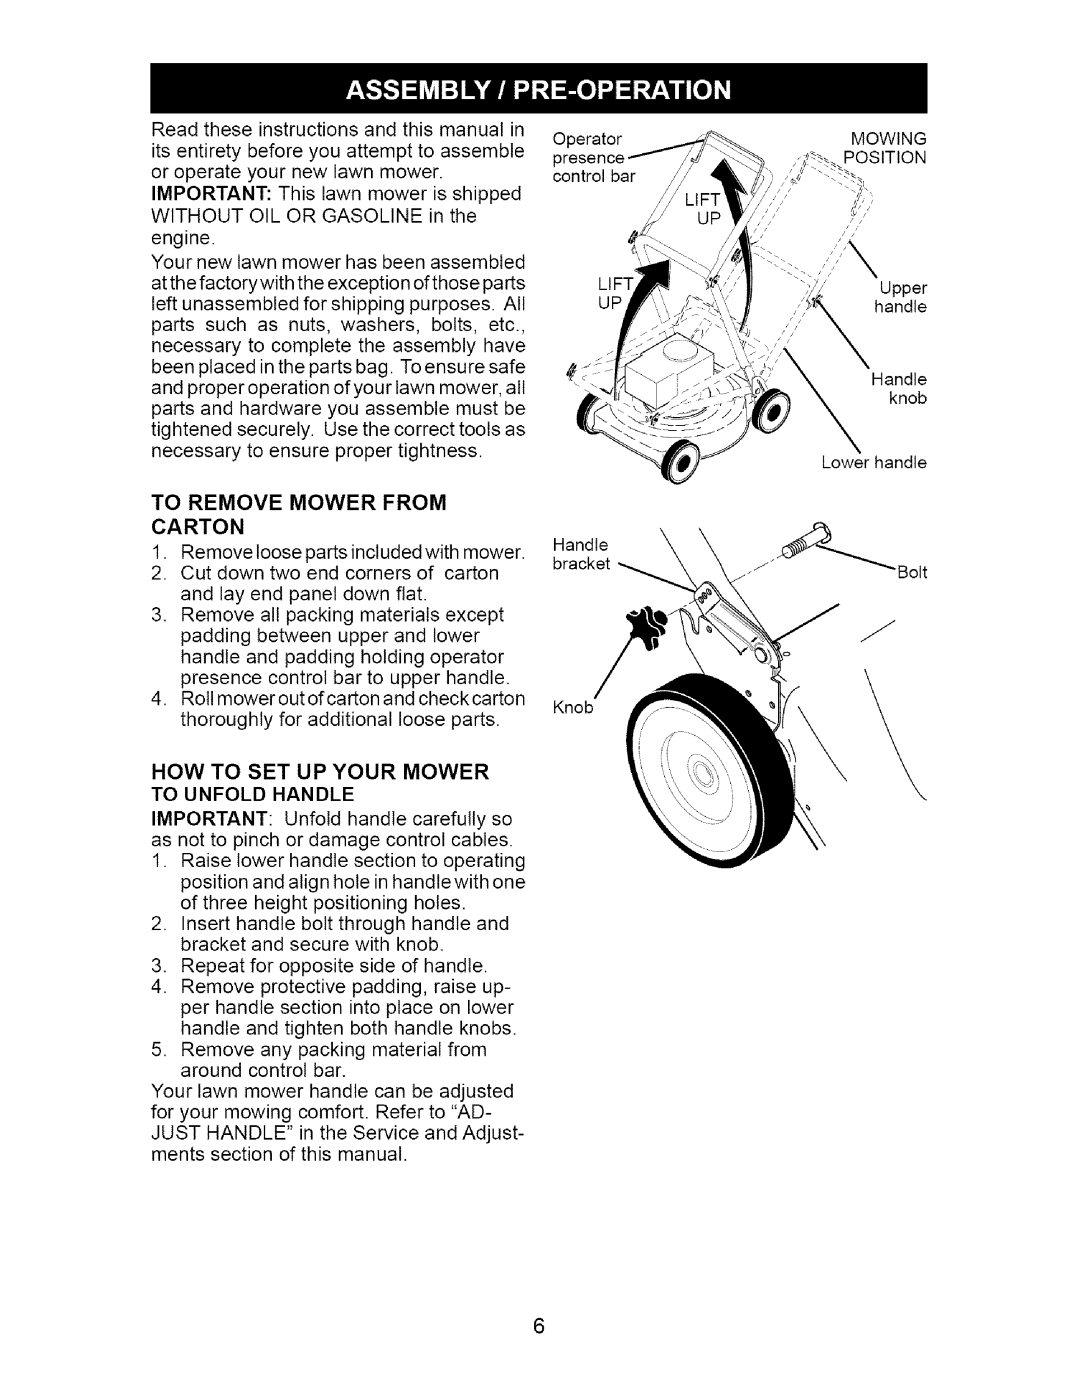 Craftsman 917.37074 manual From, Carton, How To Set Up Your Mower To Unfold Handle 